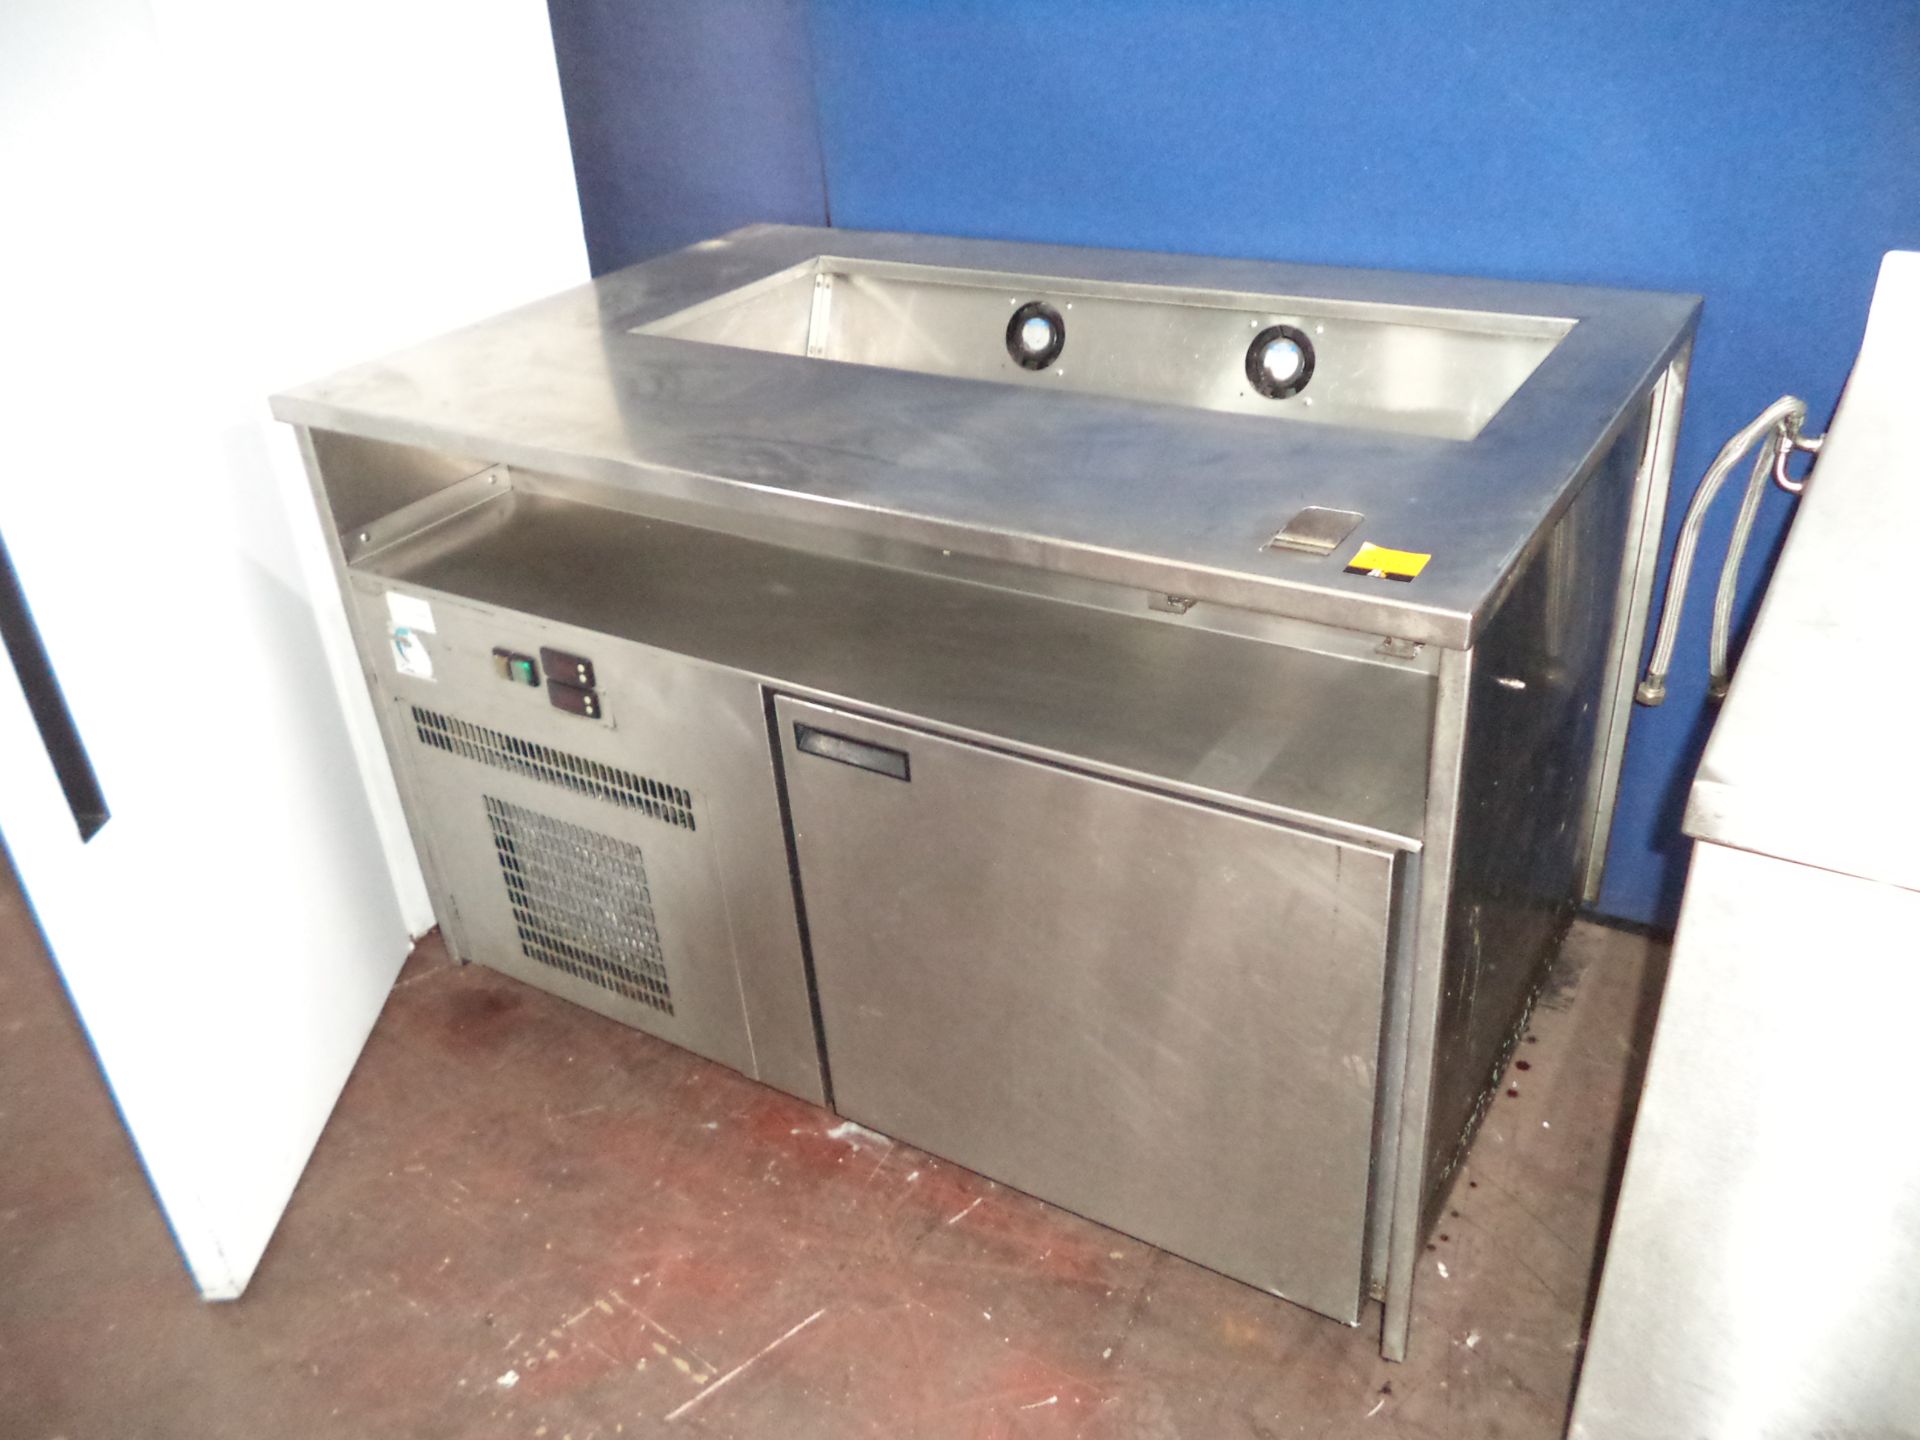 Large stainless steel refrigerated unit, max. dimensions circa 1330mm x 860mm x 920mm IMPORTANT: